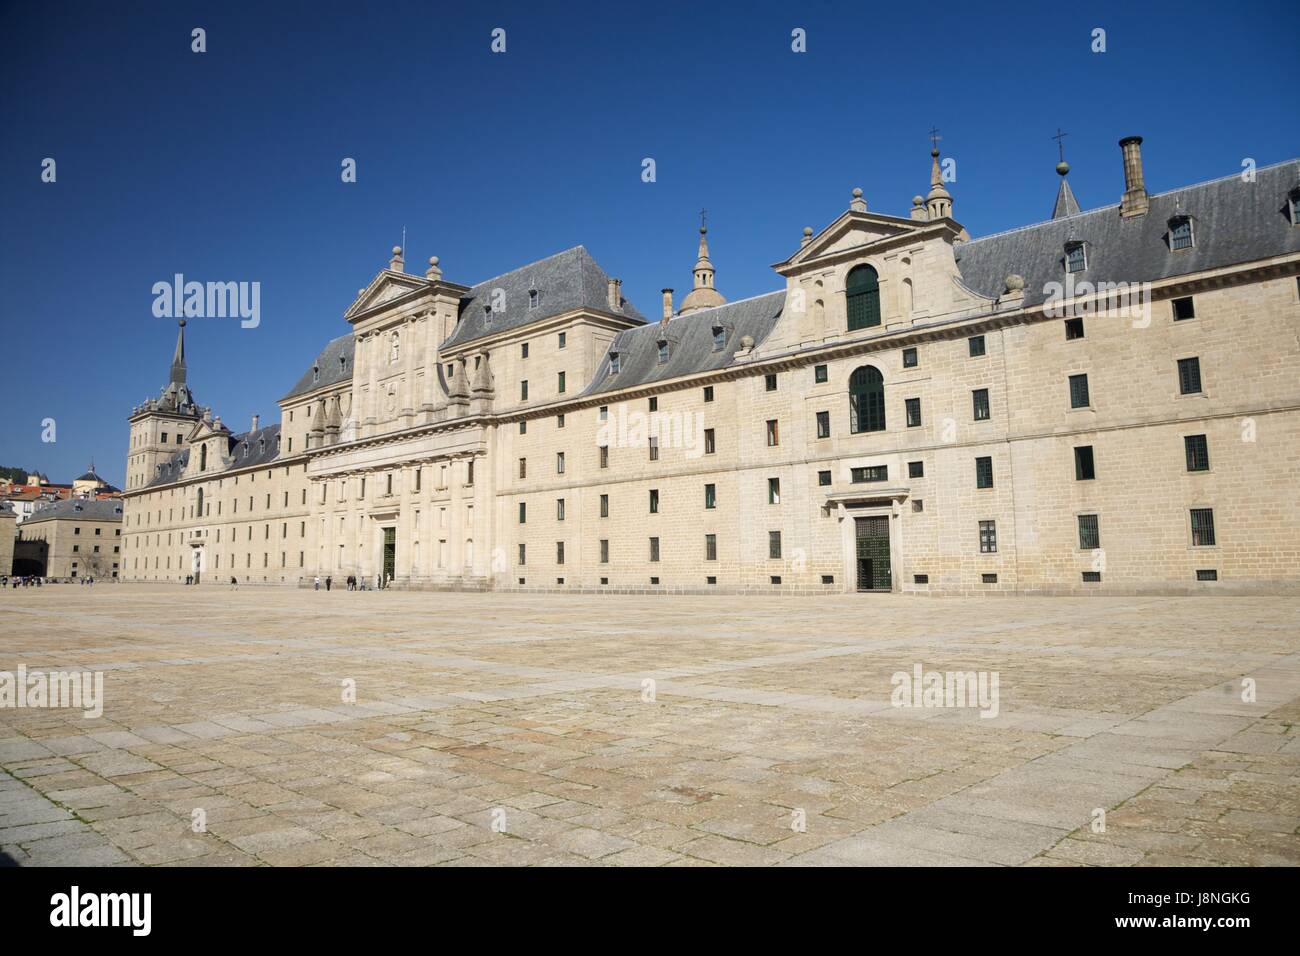 monument, spain, wall, style of construction, architecture, architectural Stock Photo